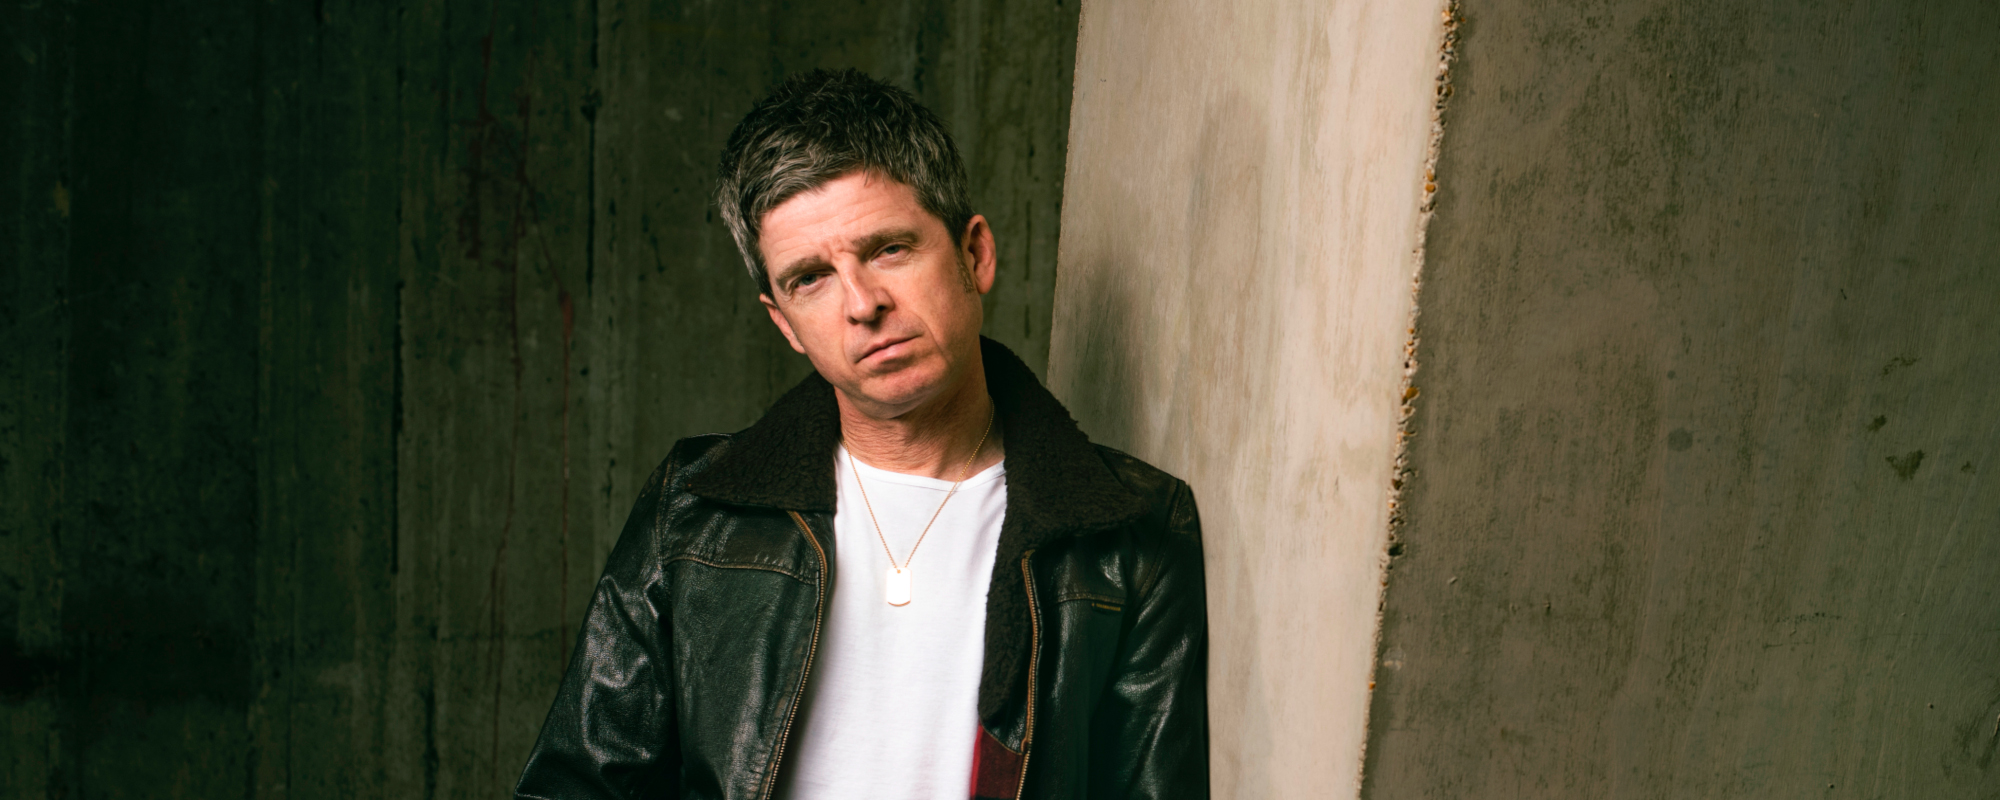 Review: Who Needs an Oasis Reunion When You Have Noel Gallagher’s ‘Council Skies’?